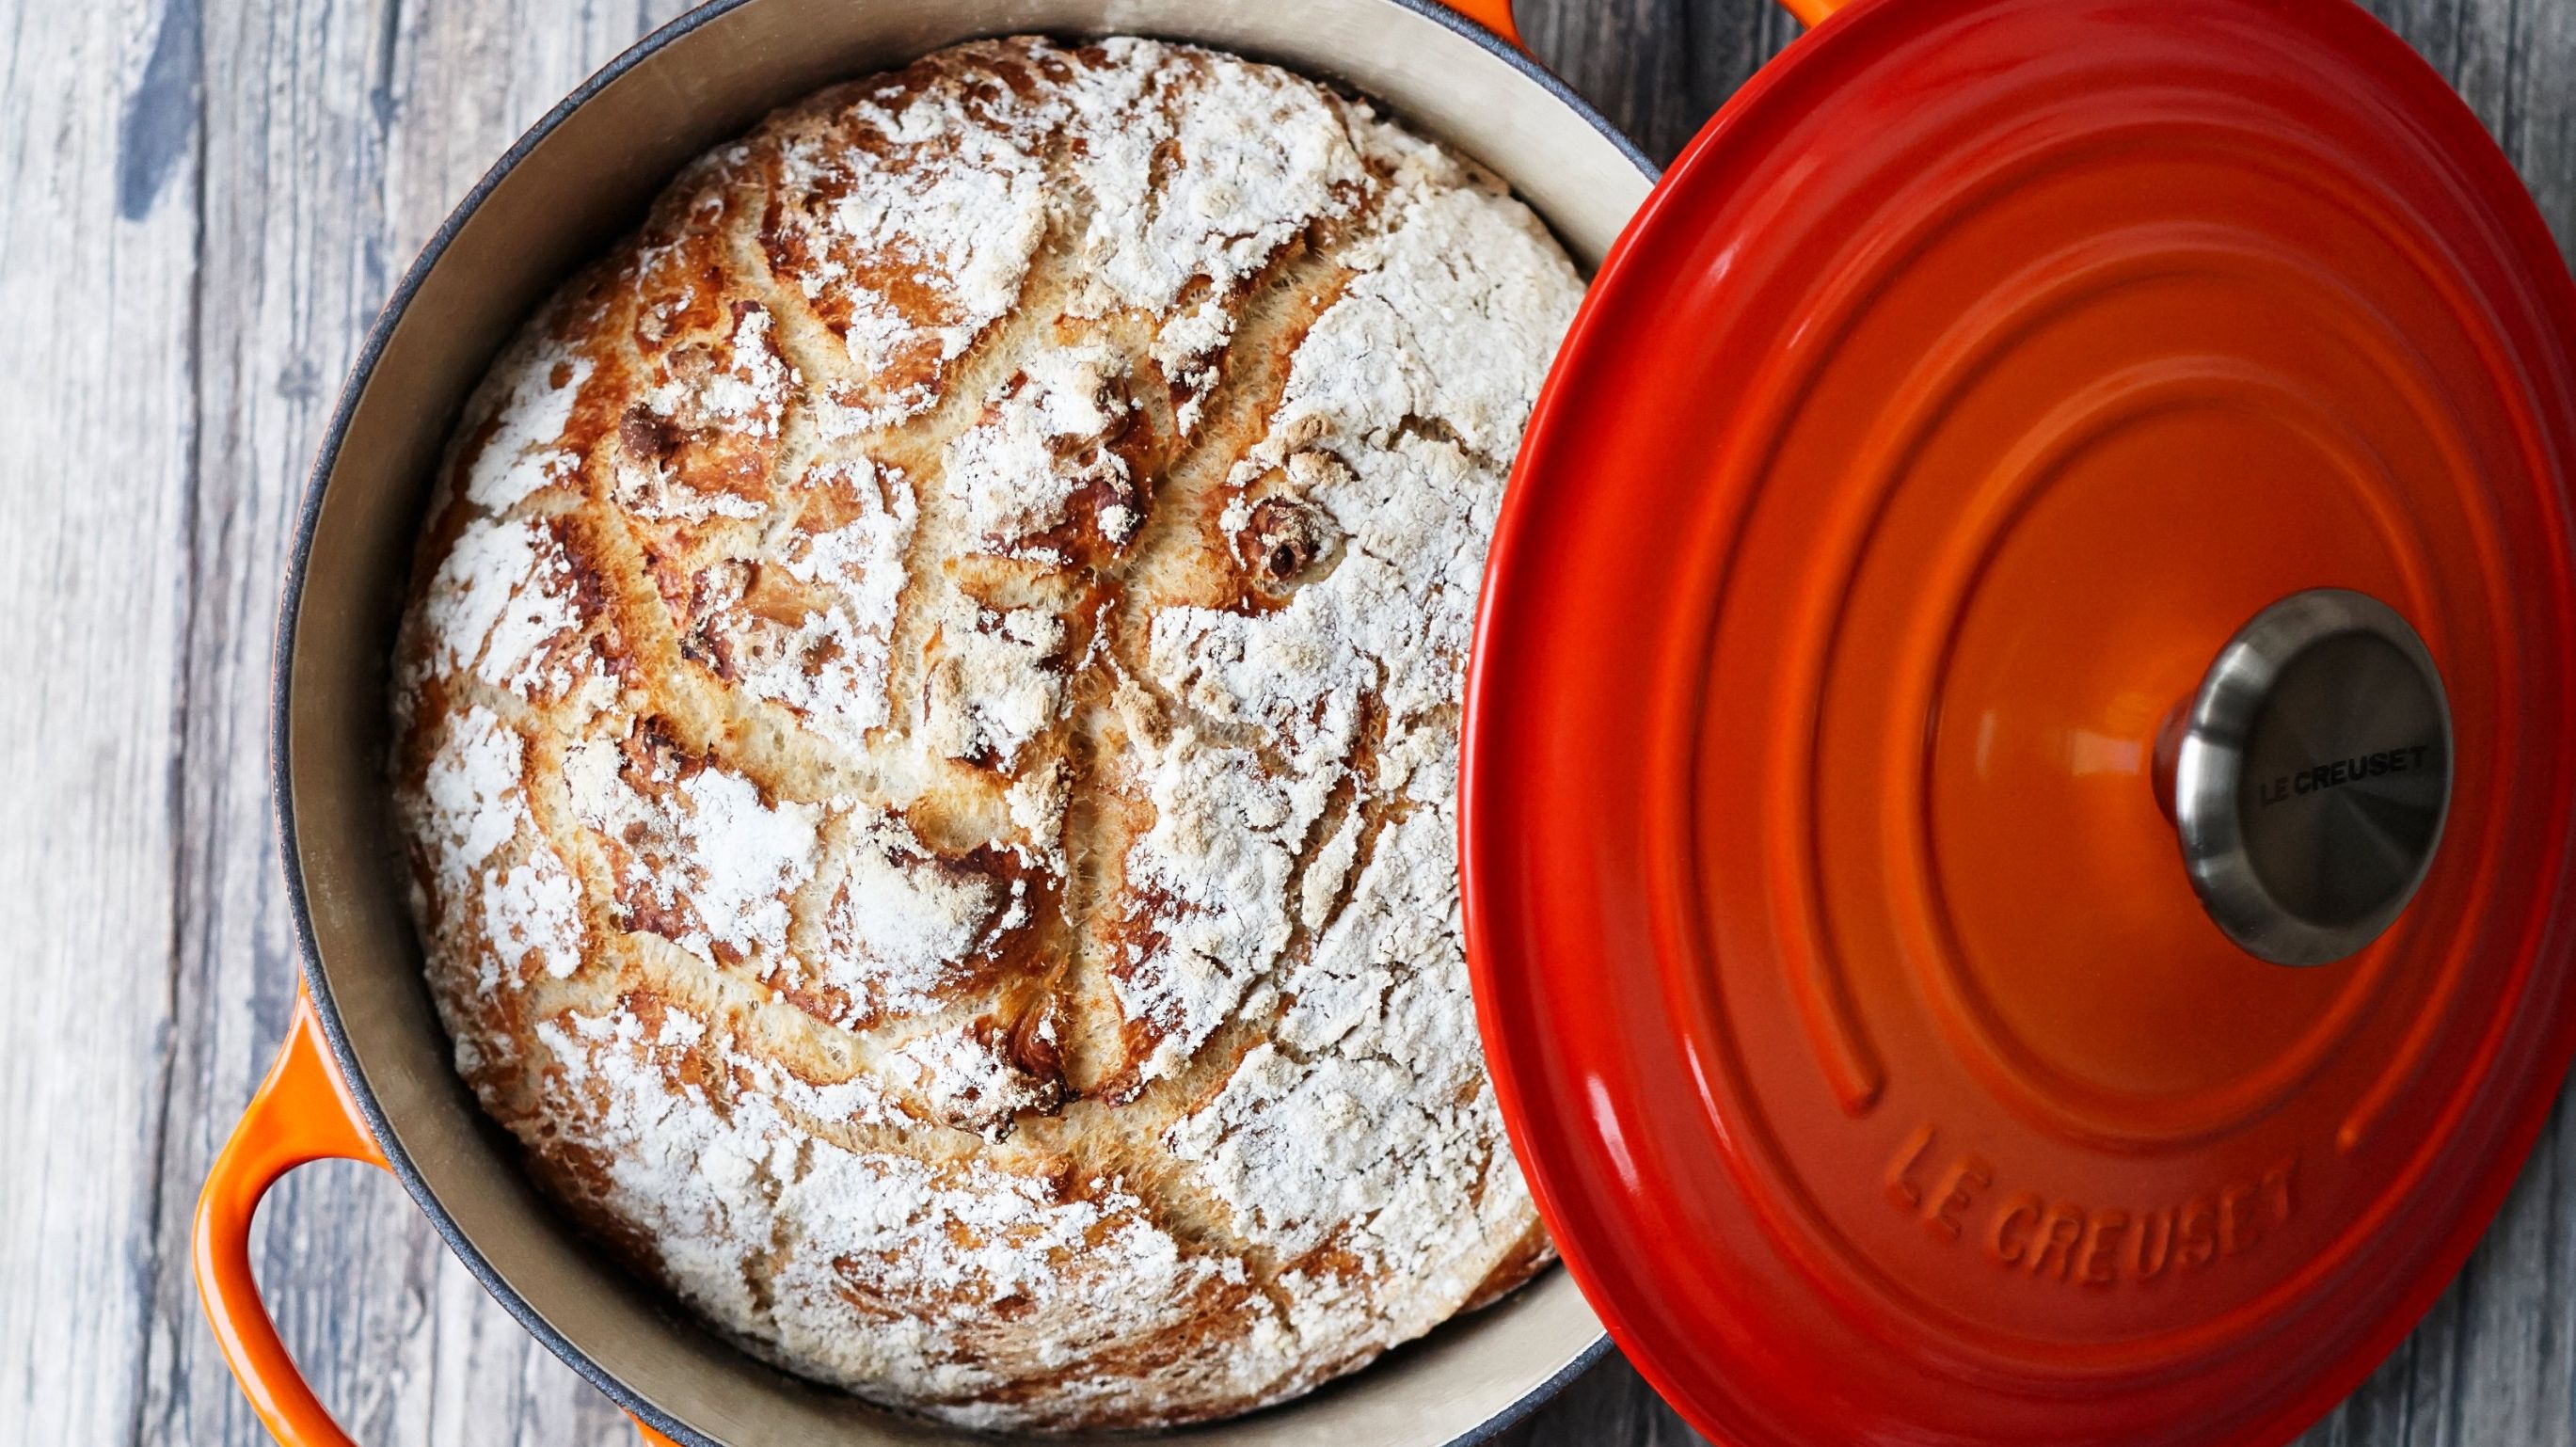 Creuset on Twitter: "Our 5-ingredient bread recipe is the perfect way to celebrate #NationalBreadDay. It's easy make, and even easier to enjoy! Simple Dutch Oven Bread: https://t.co/8BJIwODam8. #LeCreuset Round Dutch